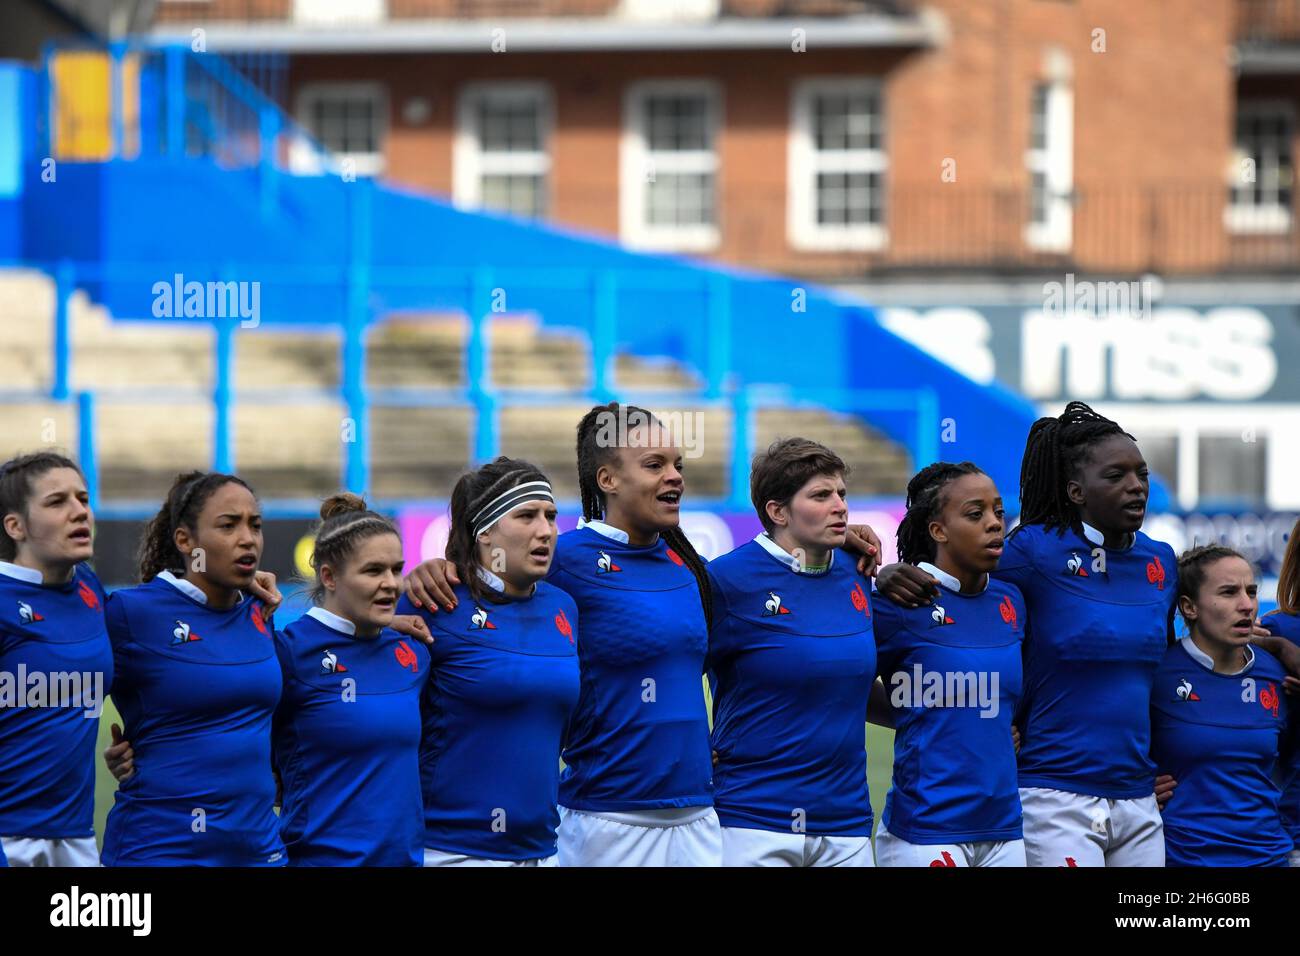 Cardiff, Wales. 23 February, 2020. The France Women's team sing the French National anthem La Marseillaise before the Women's Six Nations Championship match between Wales and France at Cardiff Arms Park in Cardiff, Wales, UK on 23, February 2020. Credit: Duncan Thomas/Majestic Media/Alamy Live News. Stock Photo